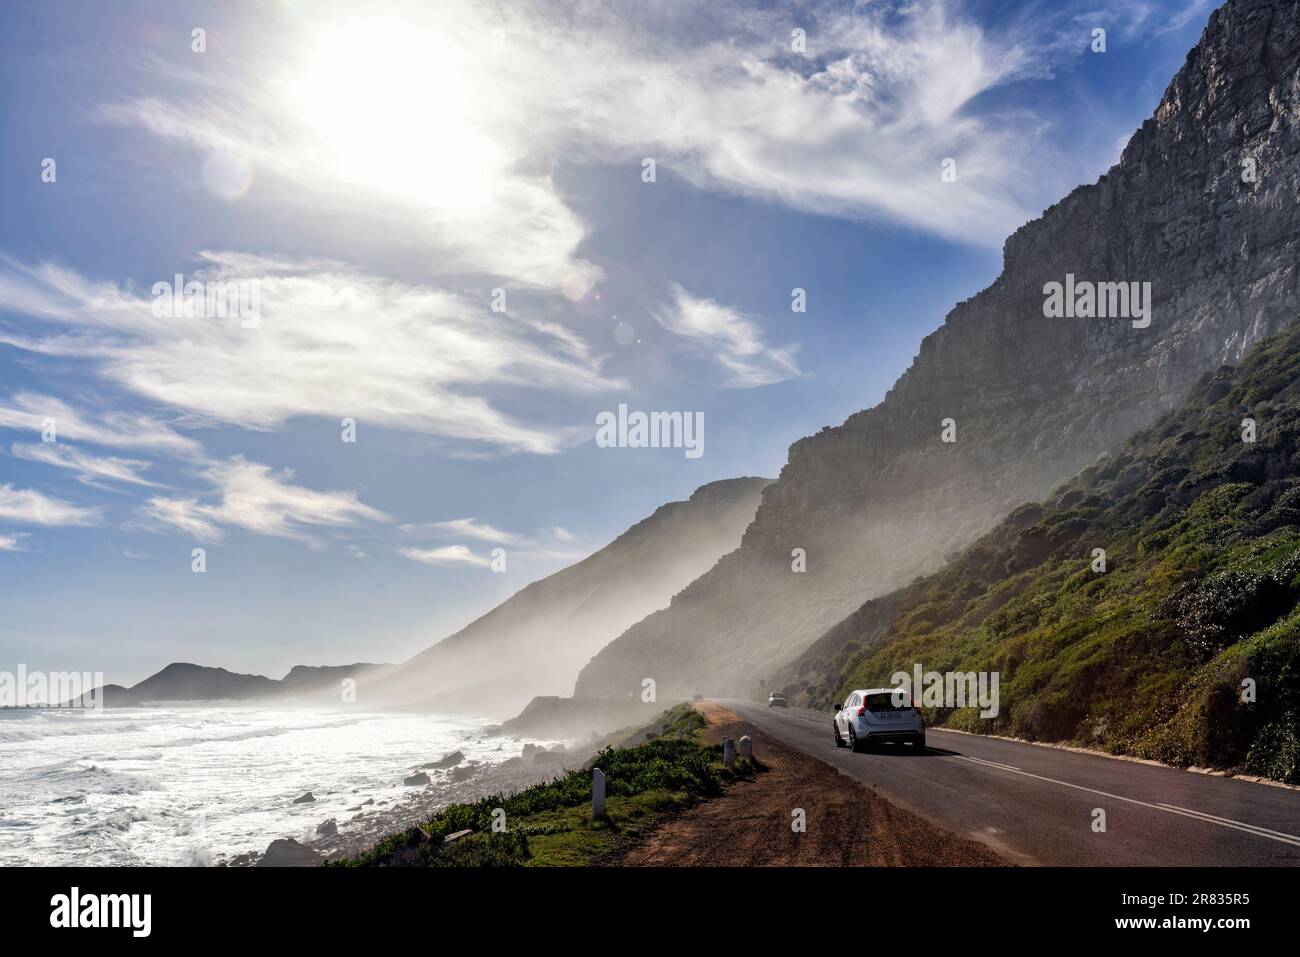 Main Road (M65) going through the village of Misty Cliffs near Cape Town, South Africa Stock Photo